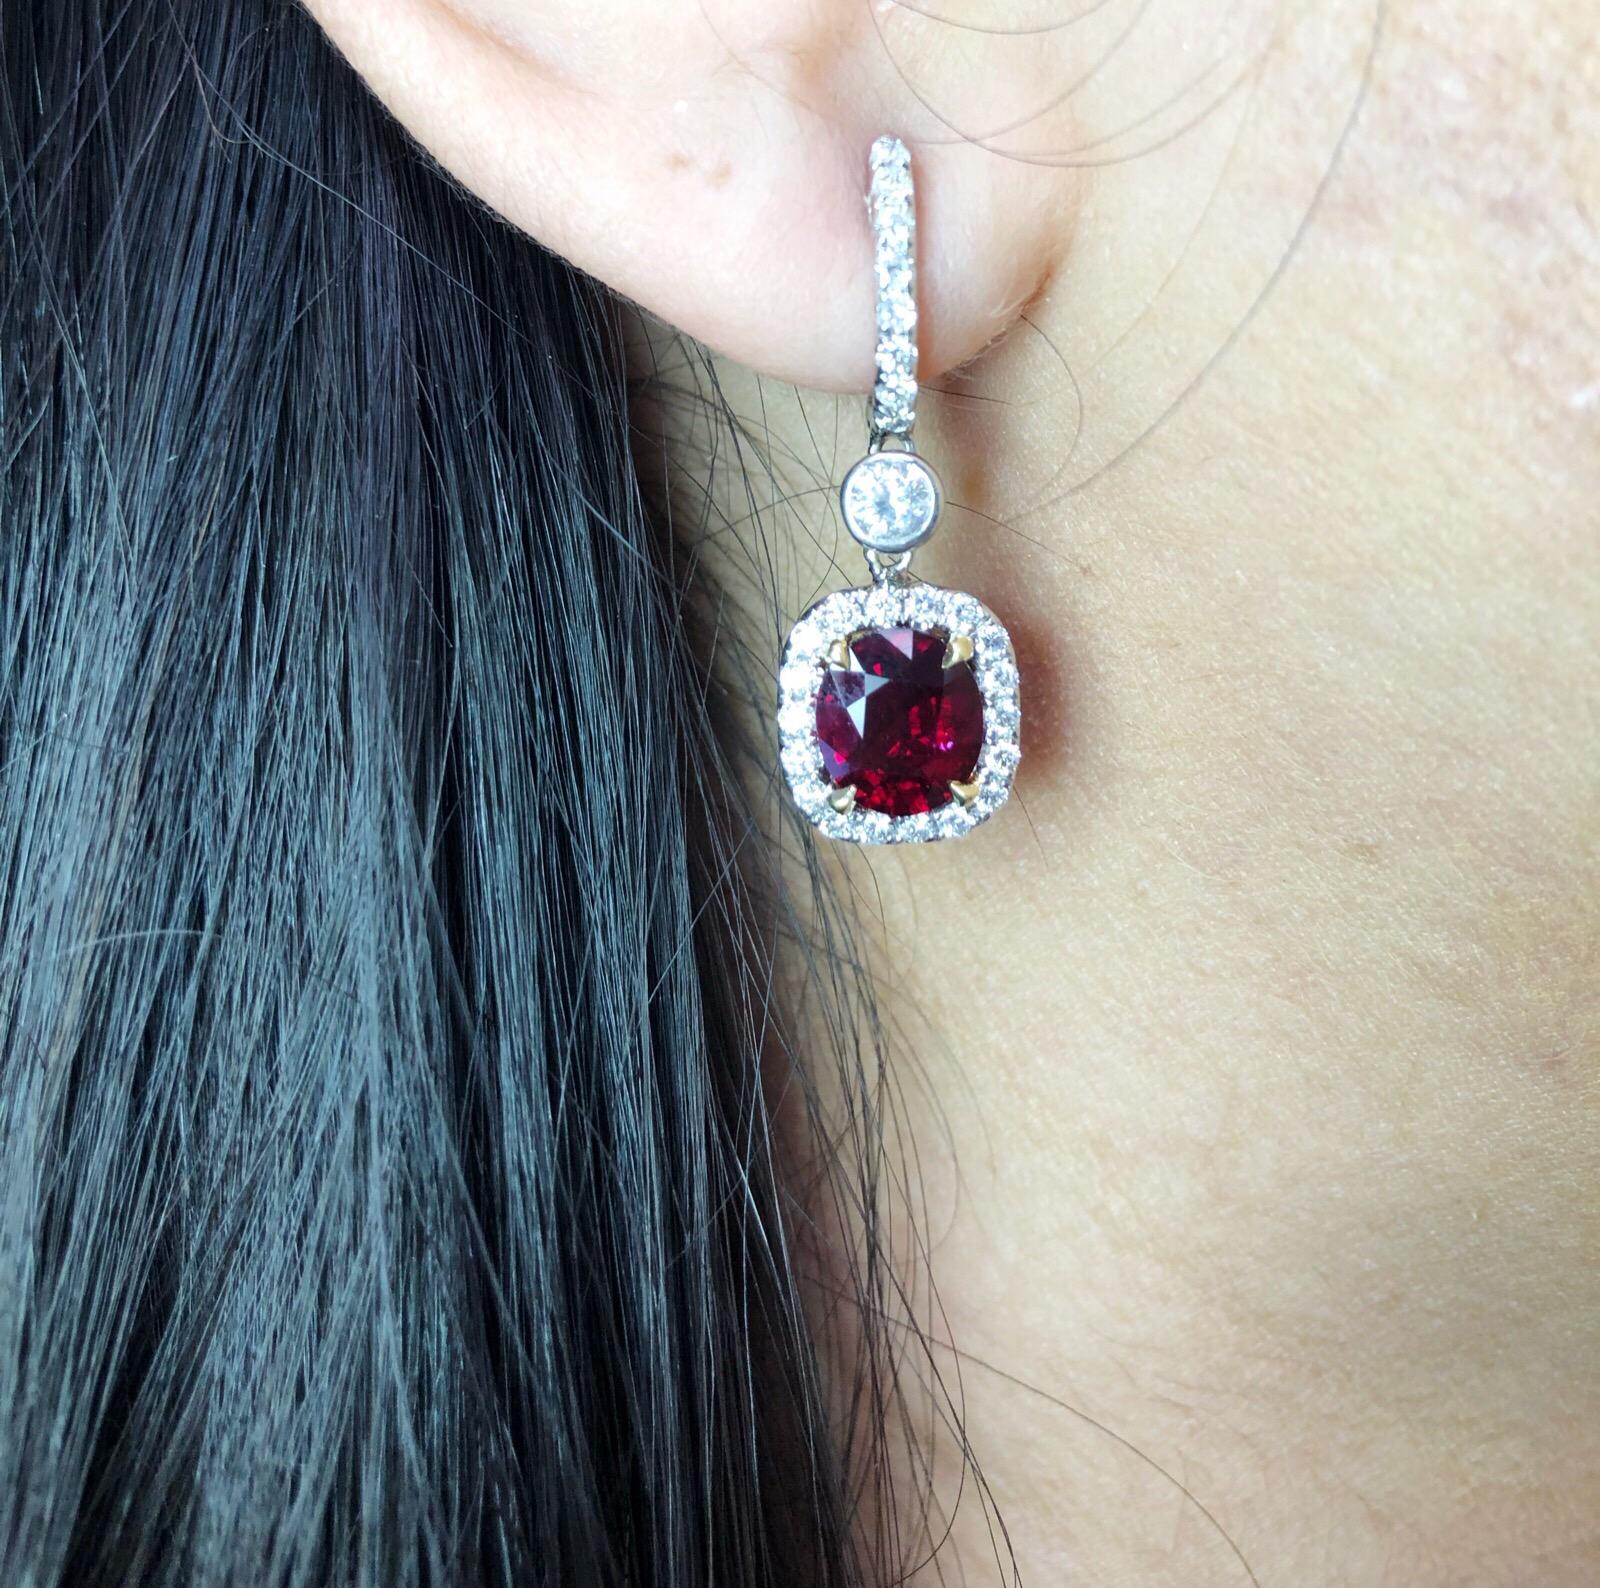 Oval Cut 4.74 Carat in Rubies 'GIA' with 1.10 Carat in Round Brilliant Diamond Earrings